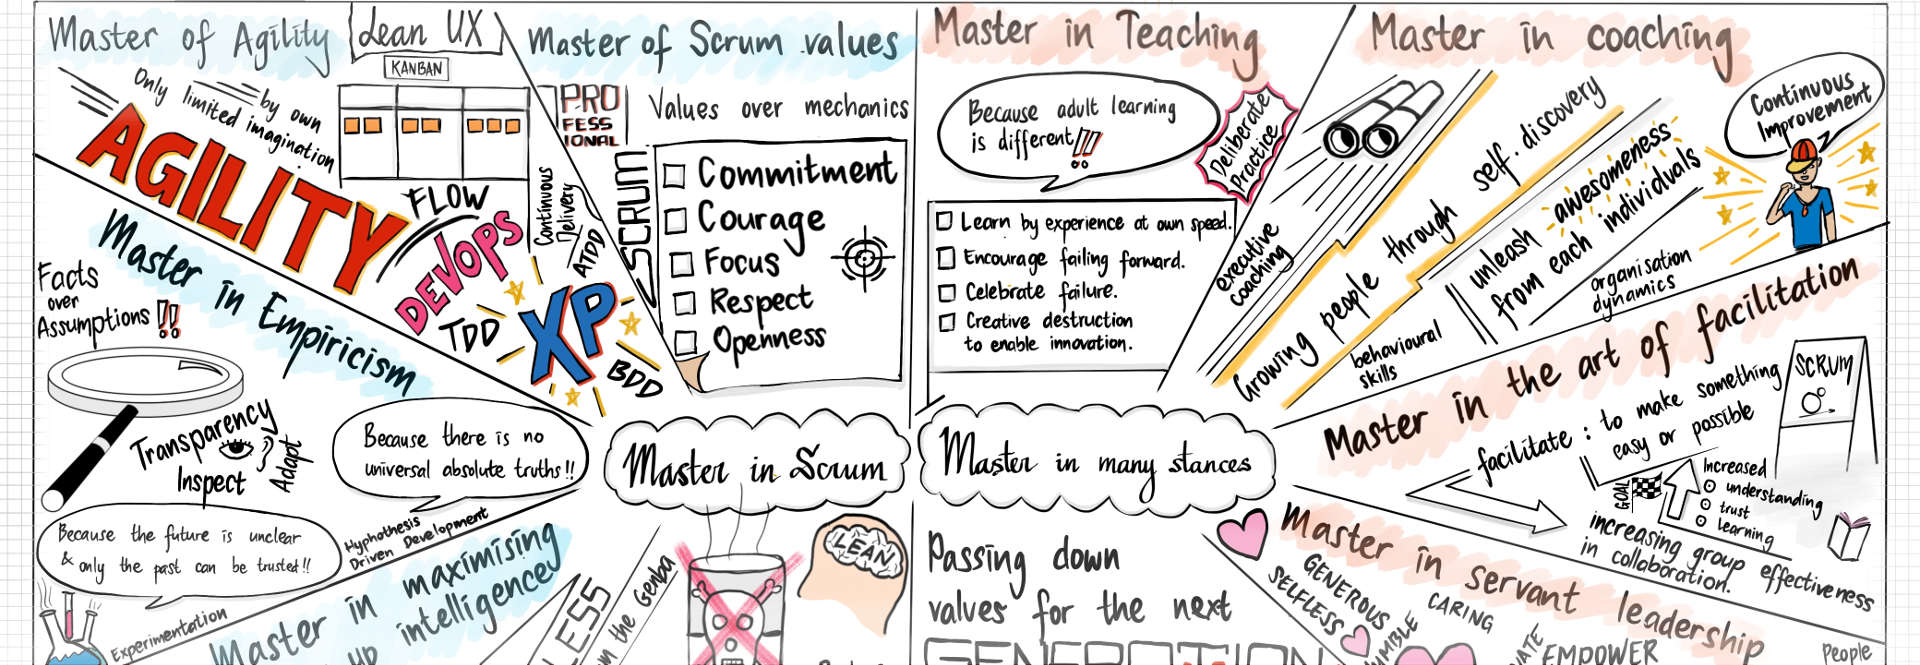 A visualization of what a Scrum Master is by Joshua Partogi